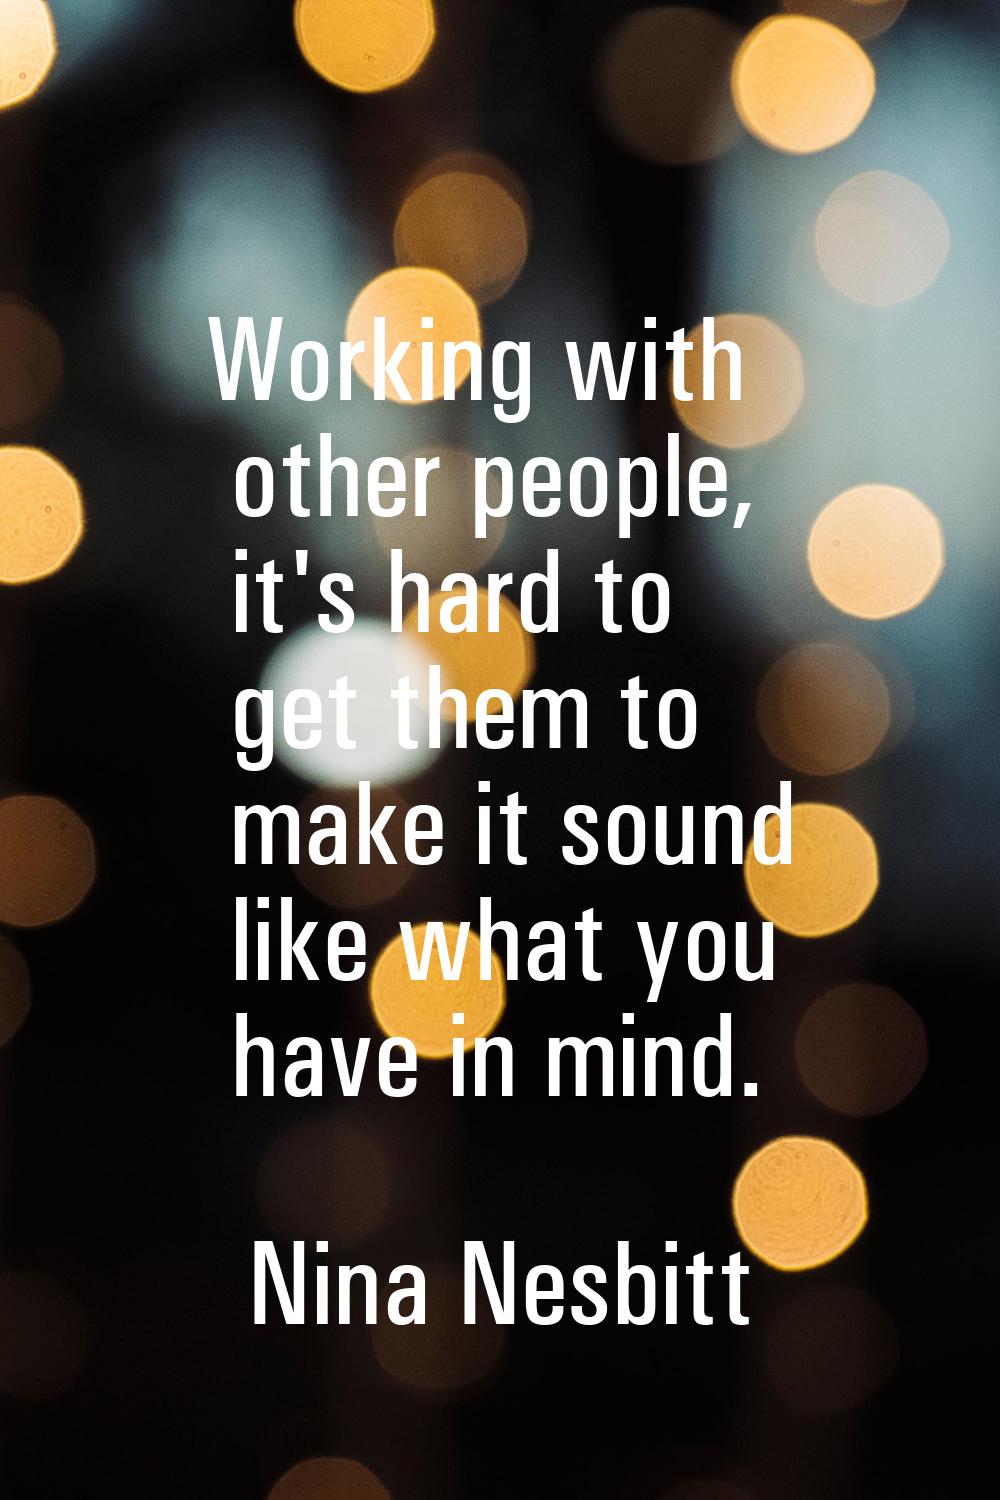 Working with other people, it's hard to get them to make it sound like what you have in mind.